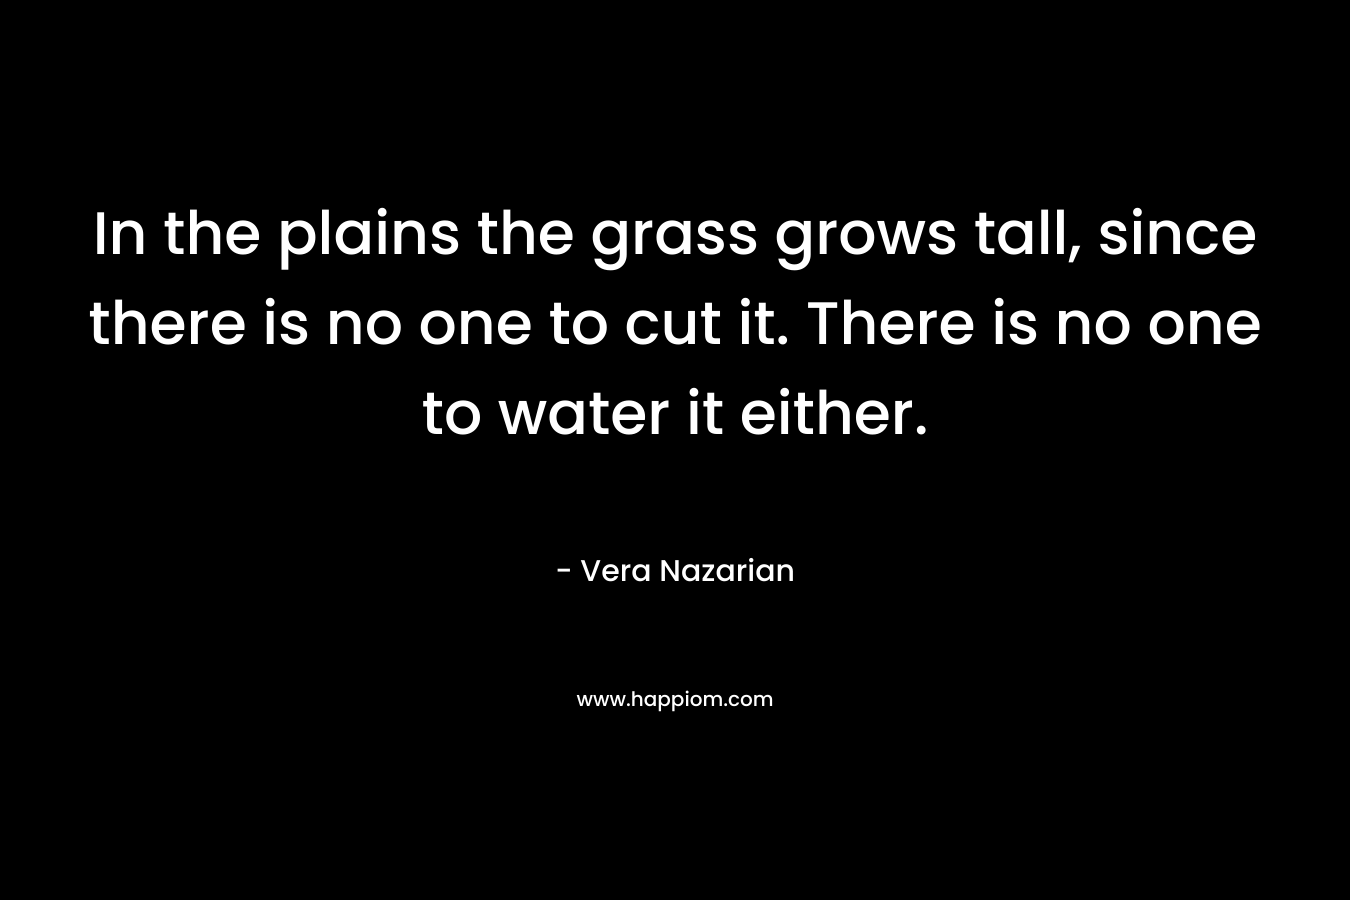 In the plains the grass grows tall, since there is no one to cut it. There is no one to water it either.